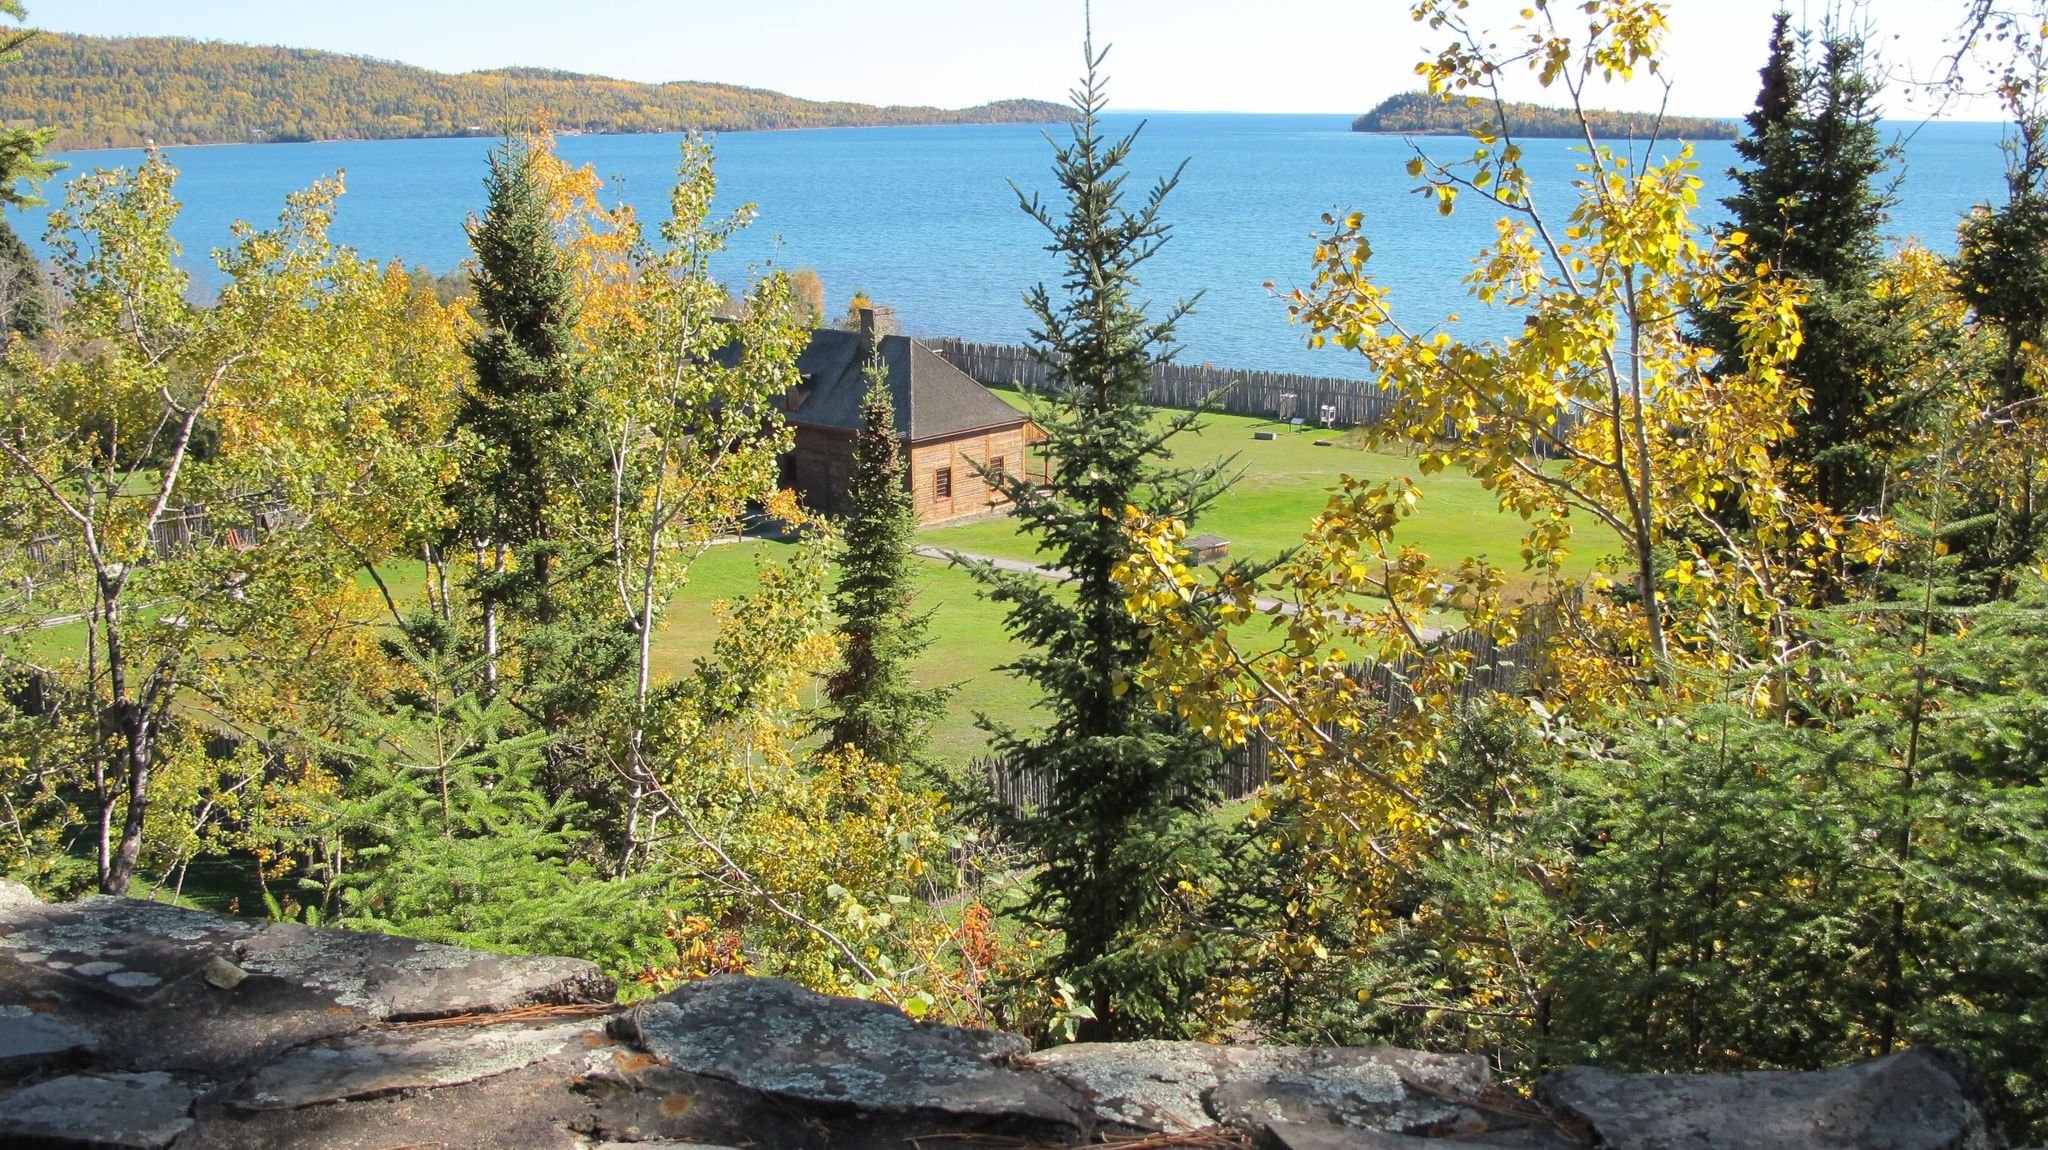 Beautiful scenary welcomes Fall visitors to Grand Portage.